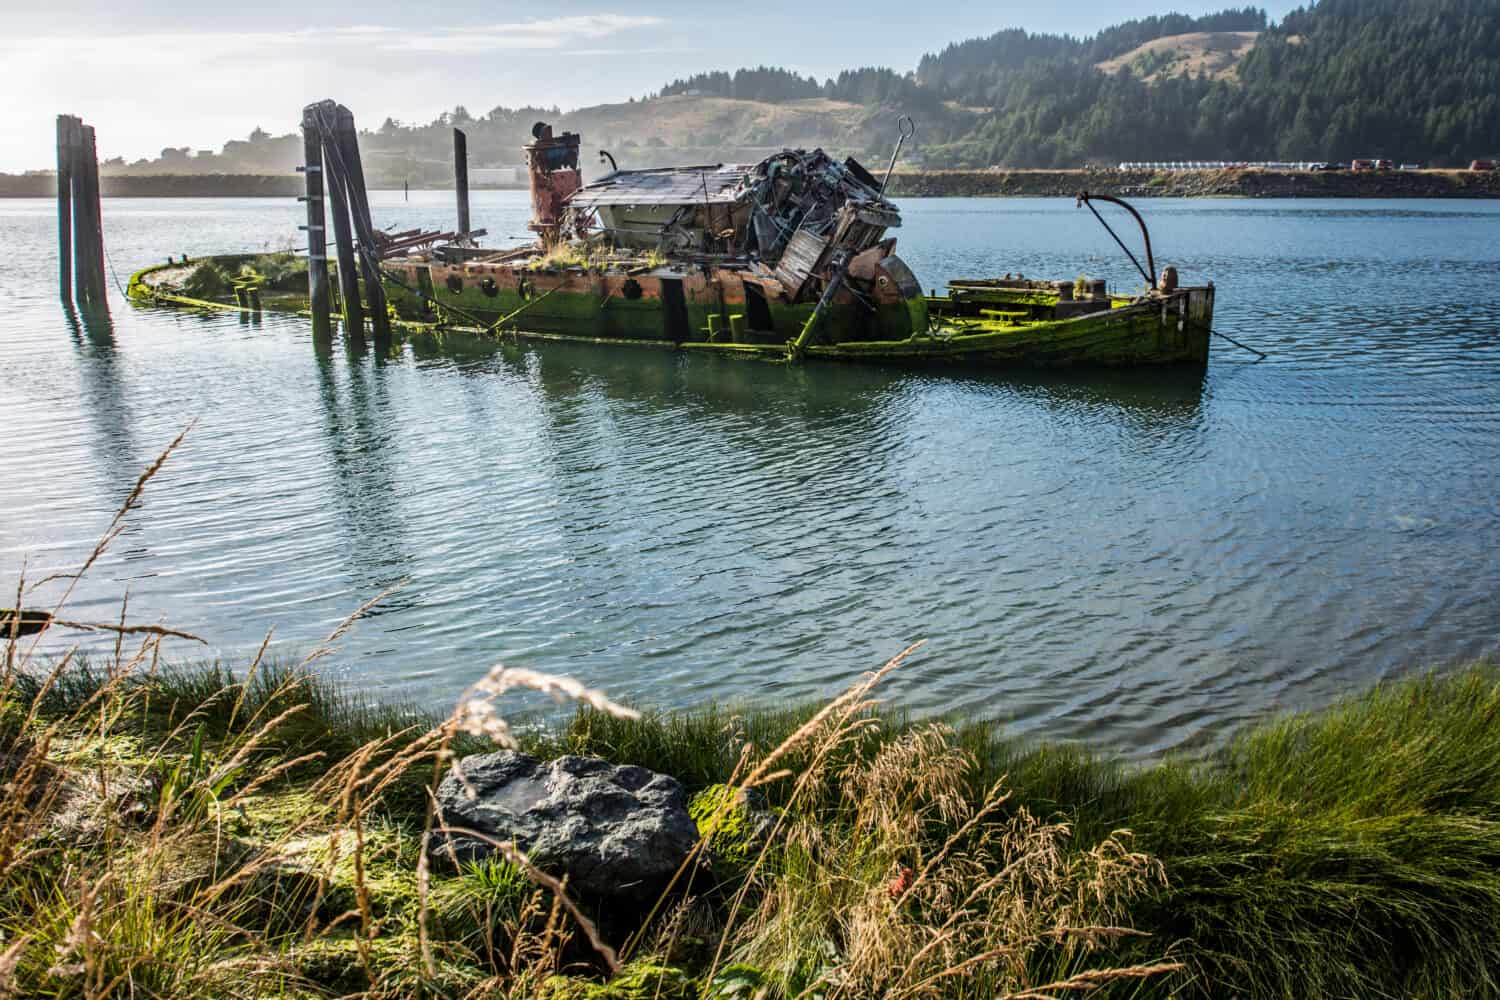 Remains of the abandoned shipwreck of the Mary D. Hume, in Gold Beach Oregon, along the Rouge River